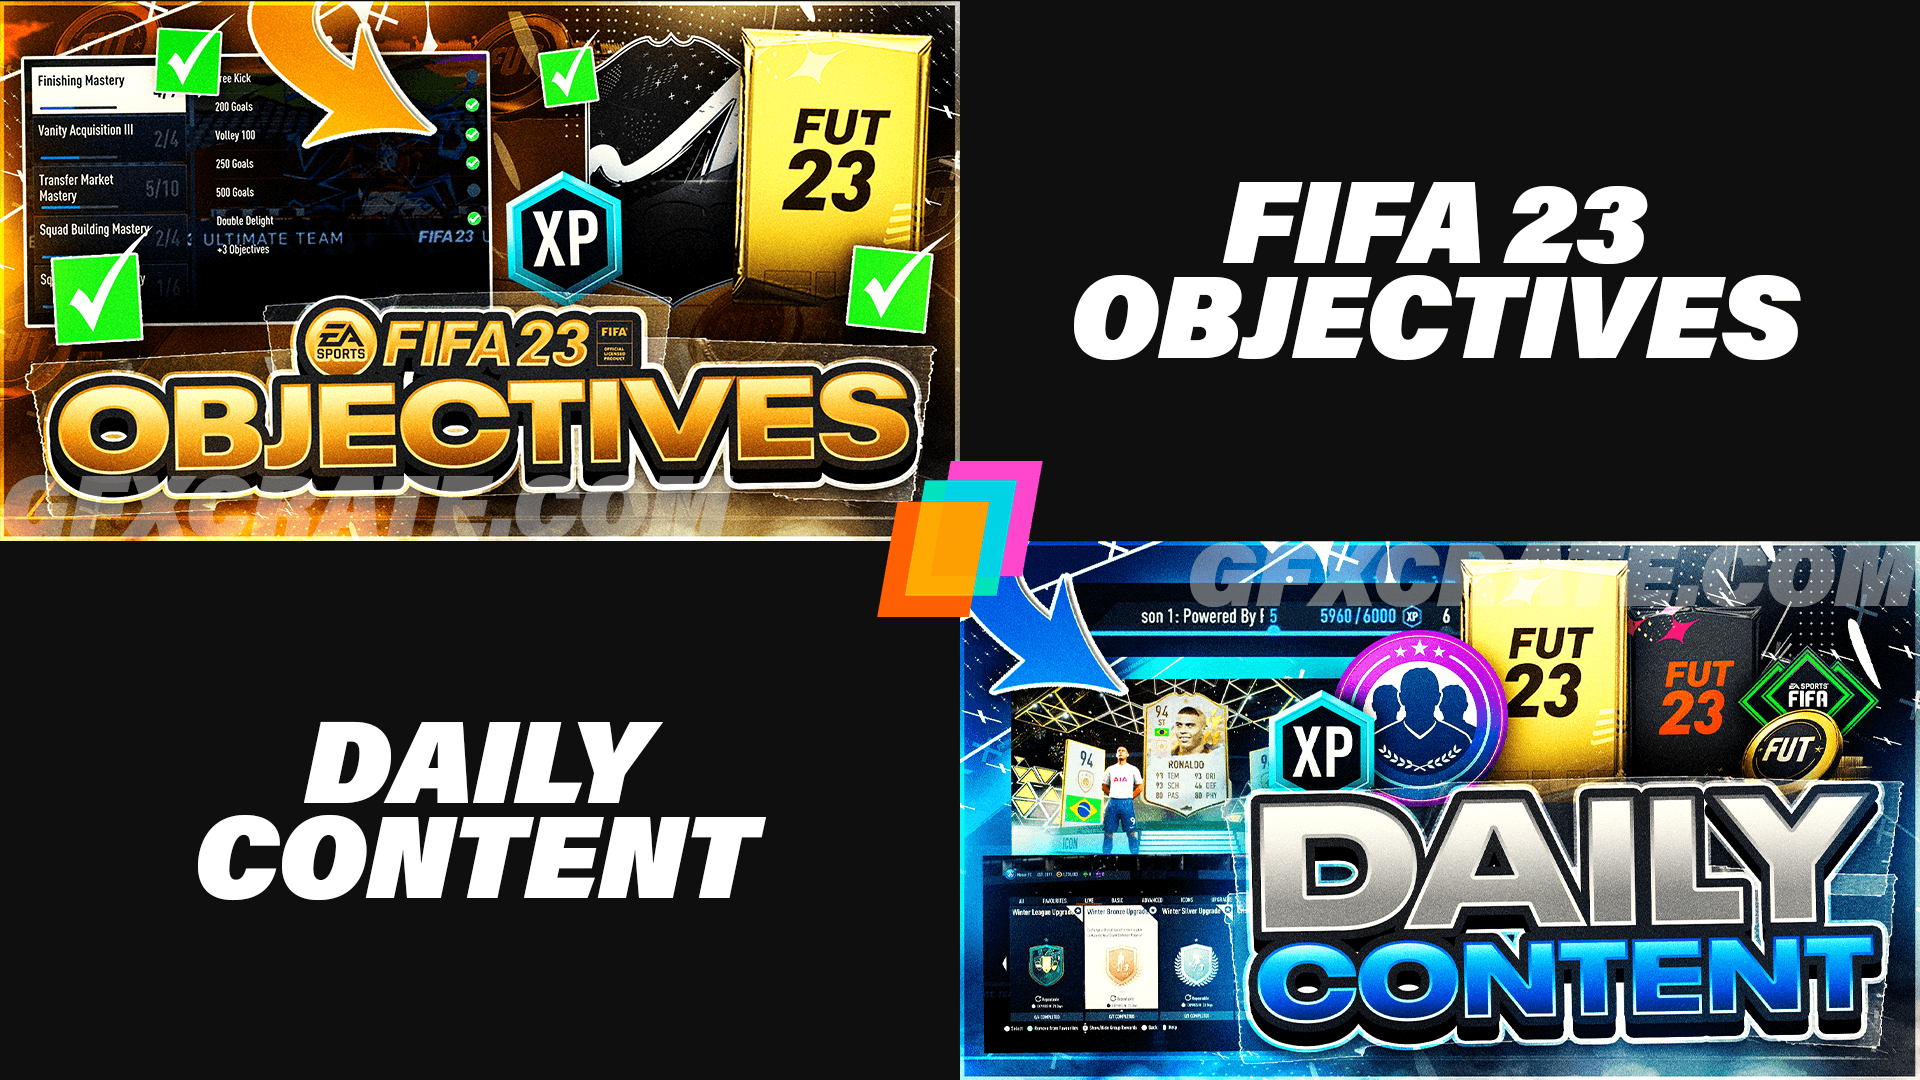 Derings on X: FIFA 23 MOBILE BETA THUMBNAIL USE FREE THUMBNAILS FOR MD  ❤️🔁?  / X